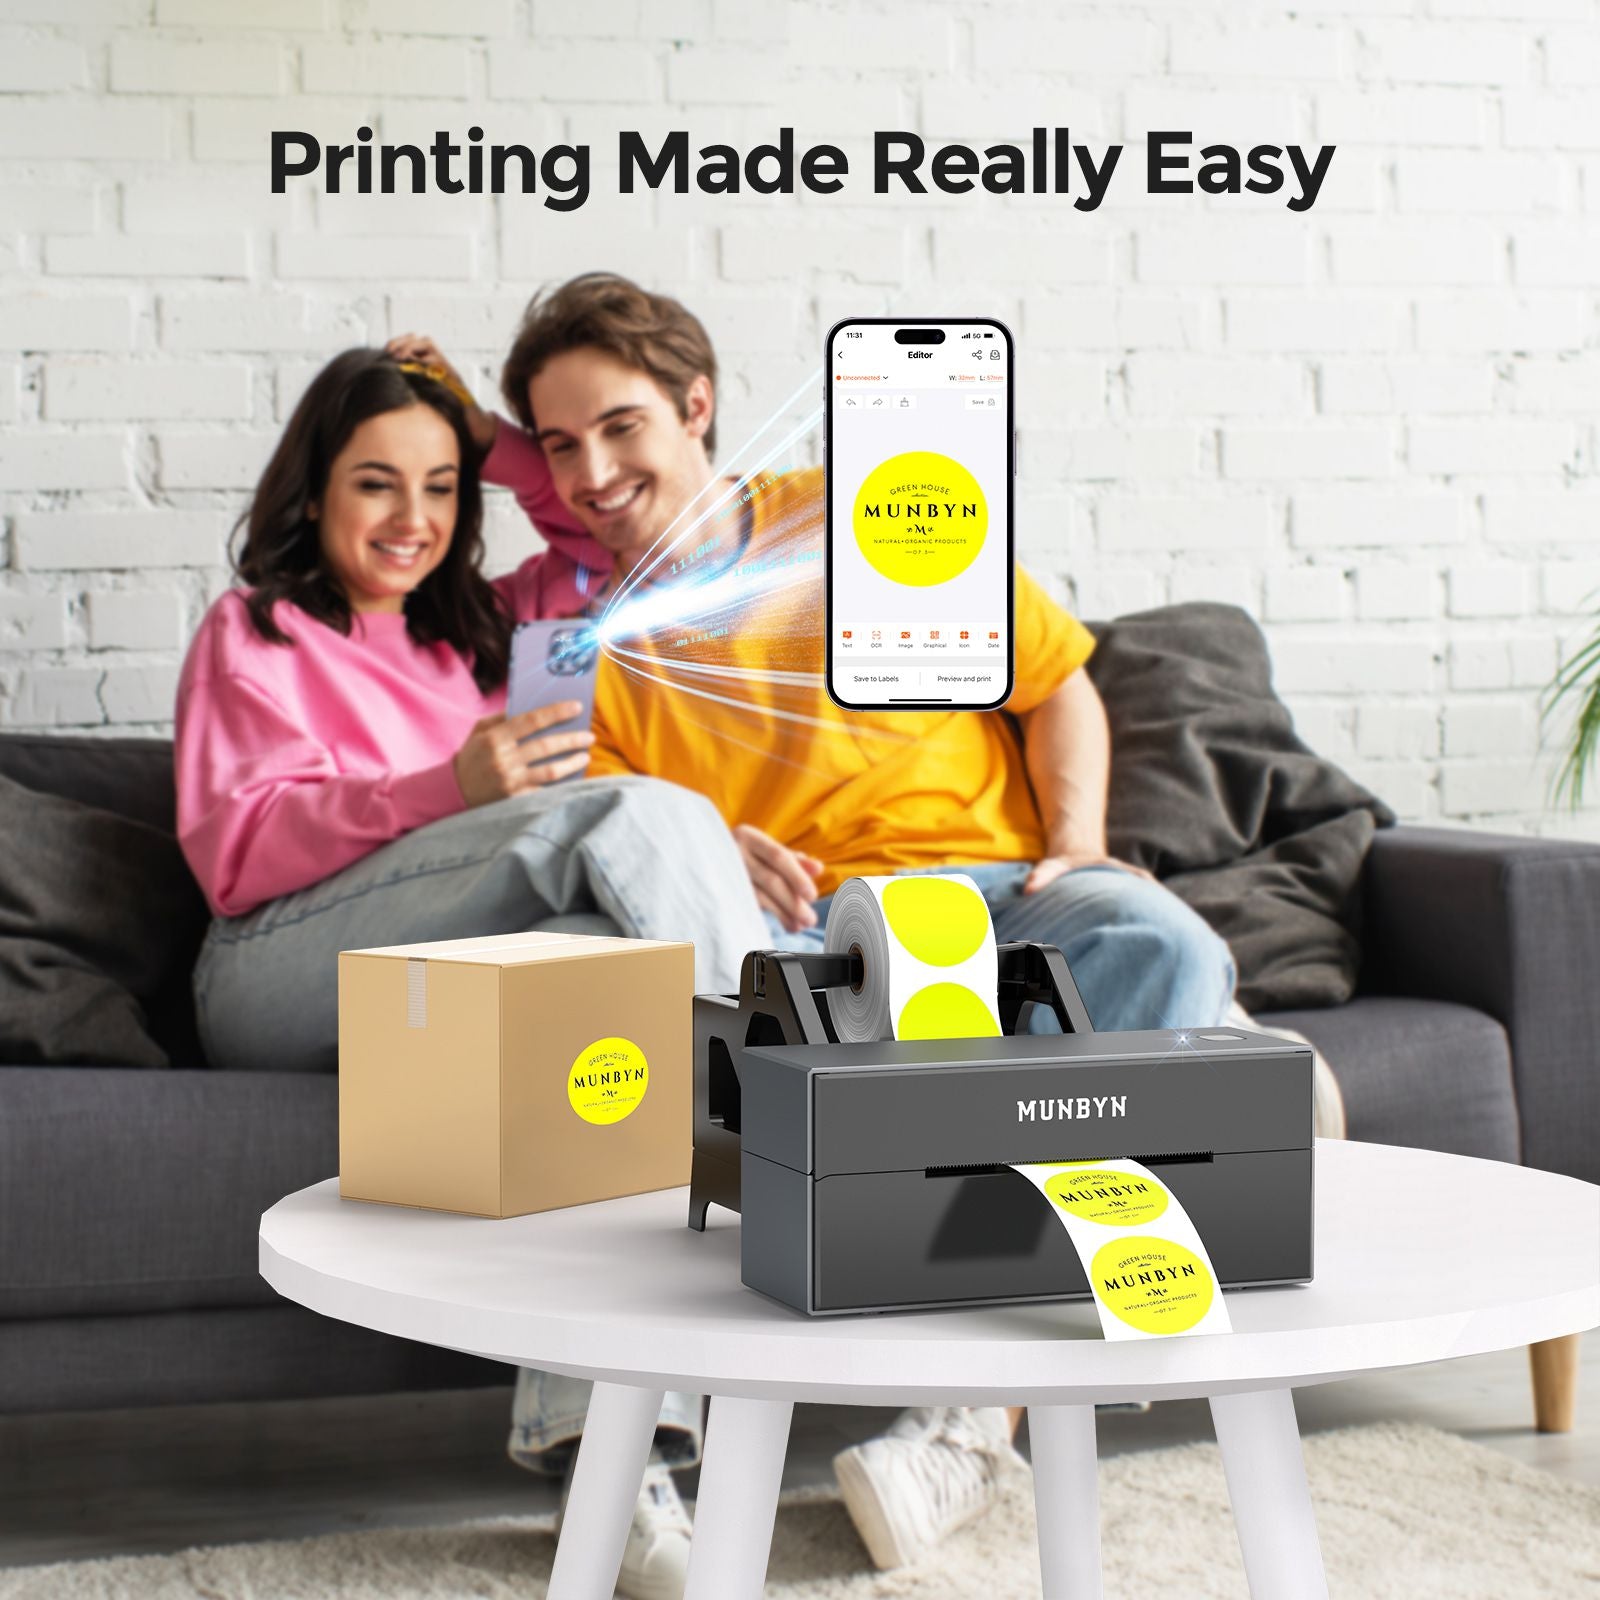 The Bluetooth wireless printer can easily connect to your phone and tablet via Bluetooth. In addition, it can connect to your computer system via USB port for printing.